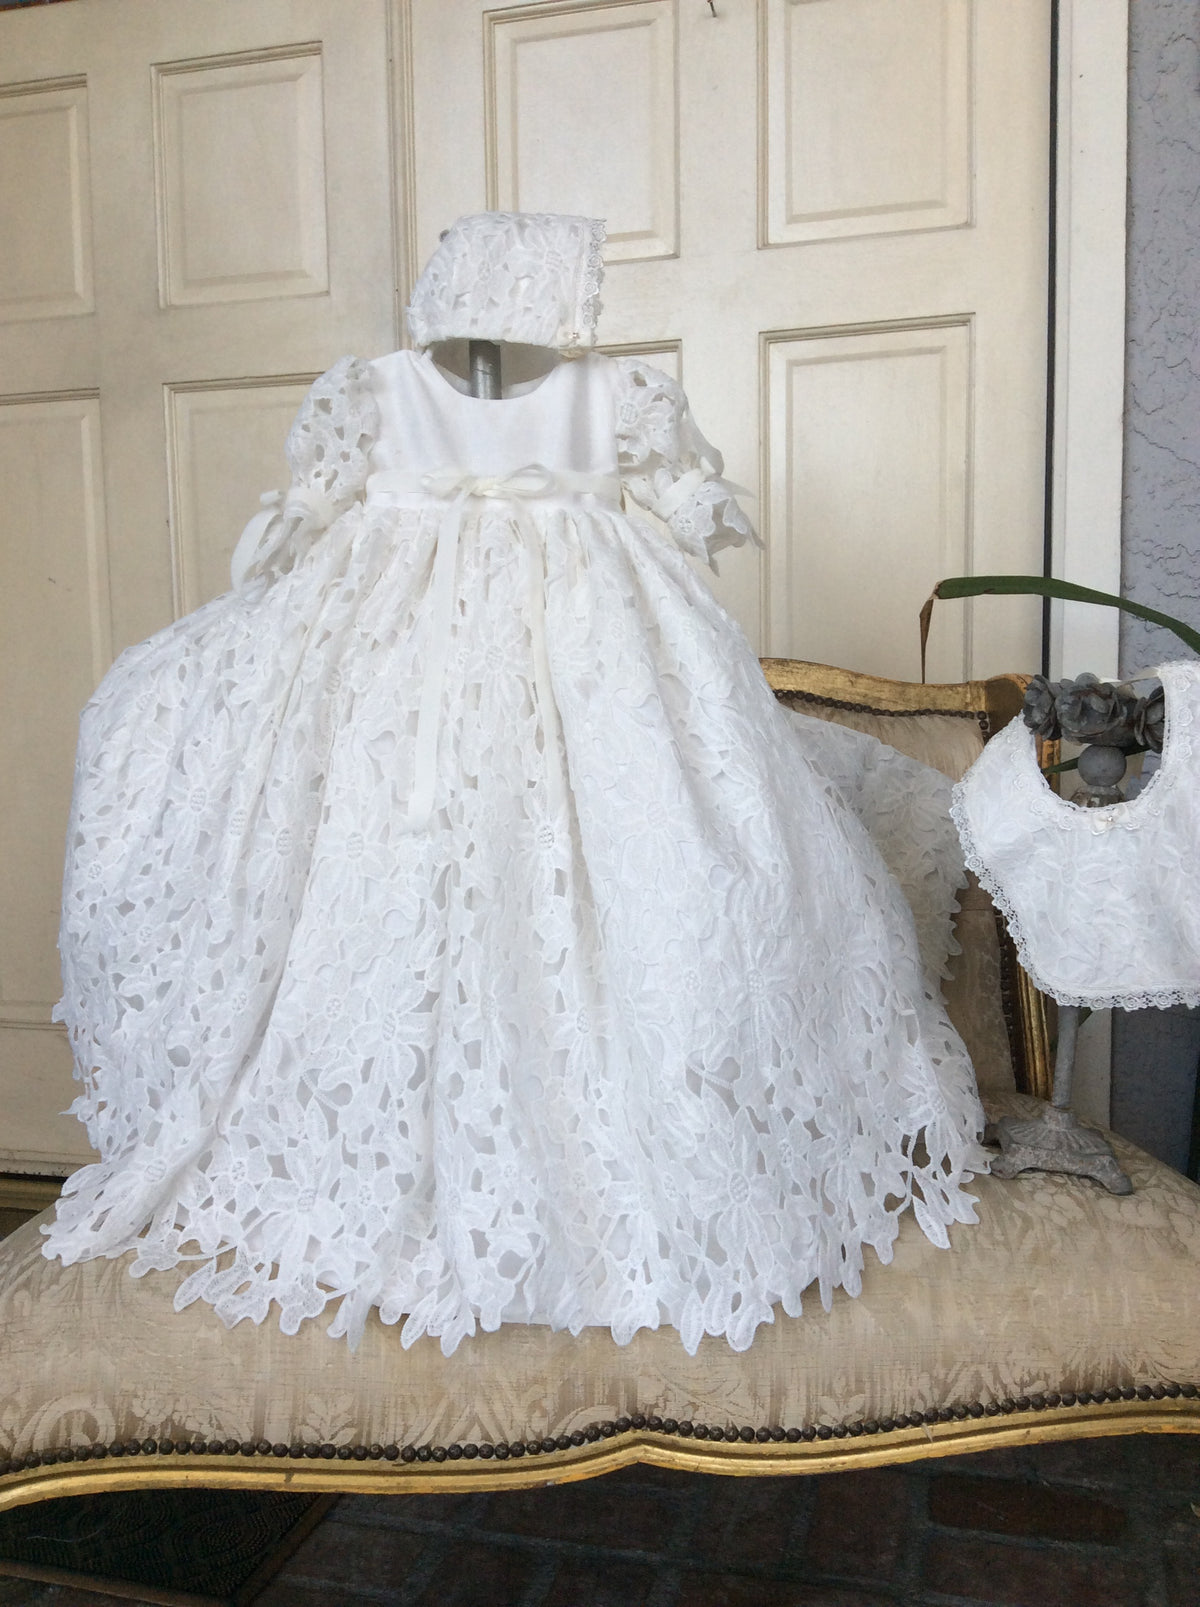 Christening Gown with Bonnet - Kendal